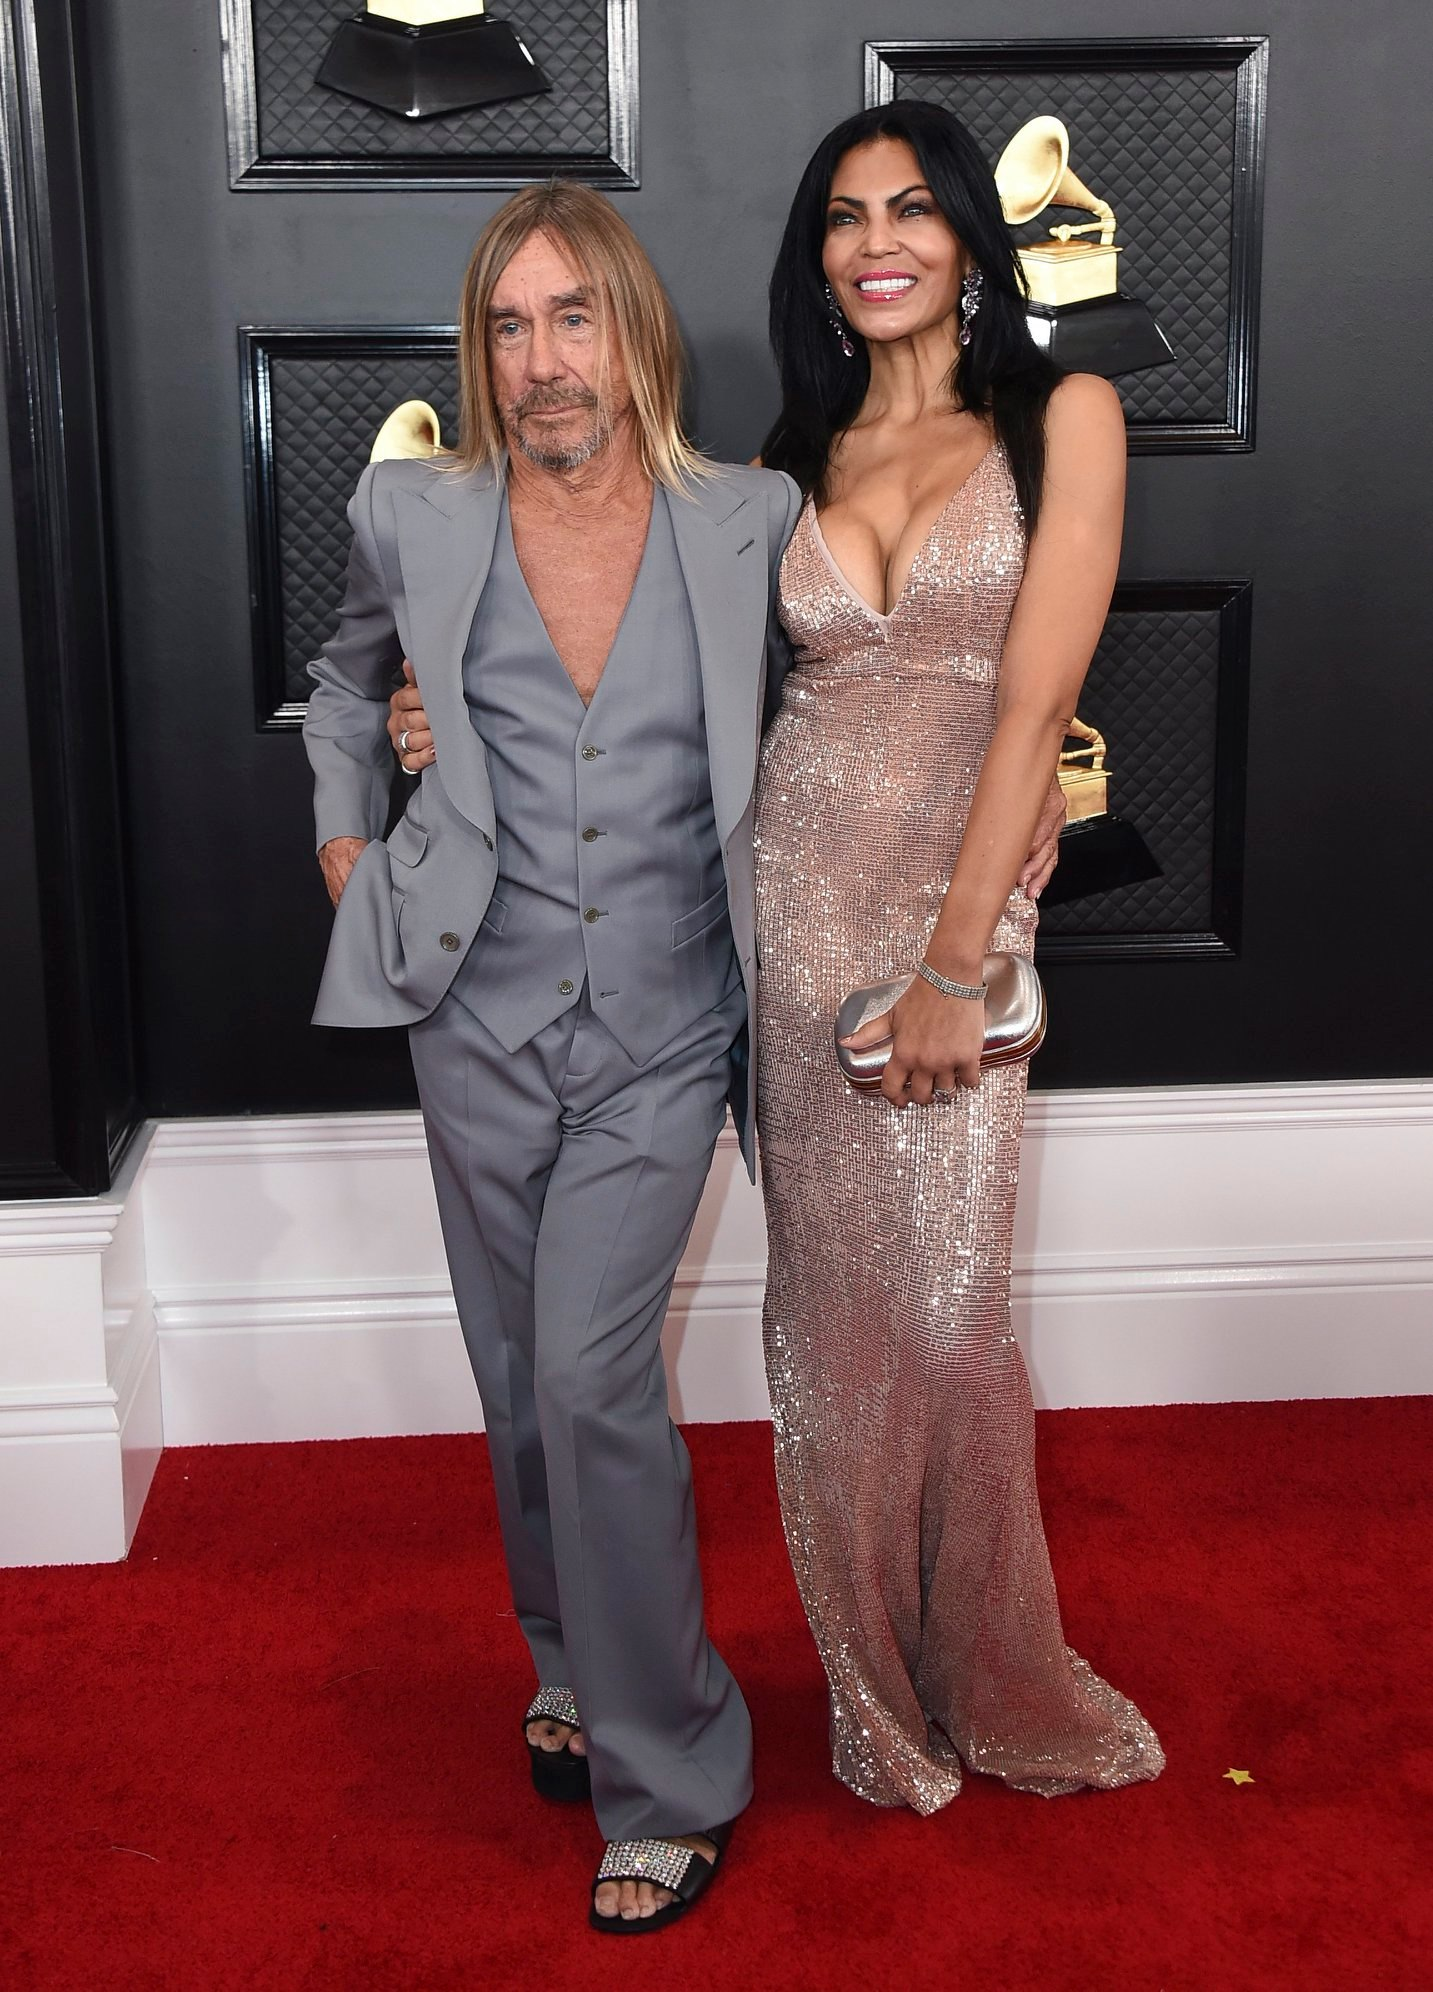 Iggy Pop pictured with his current wife Nina Alu